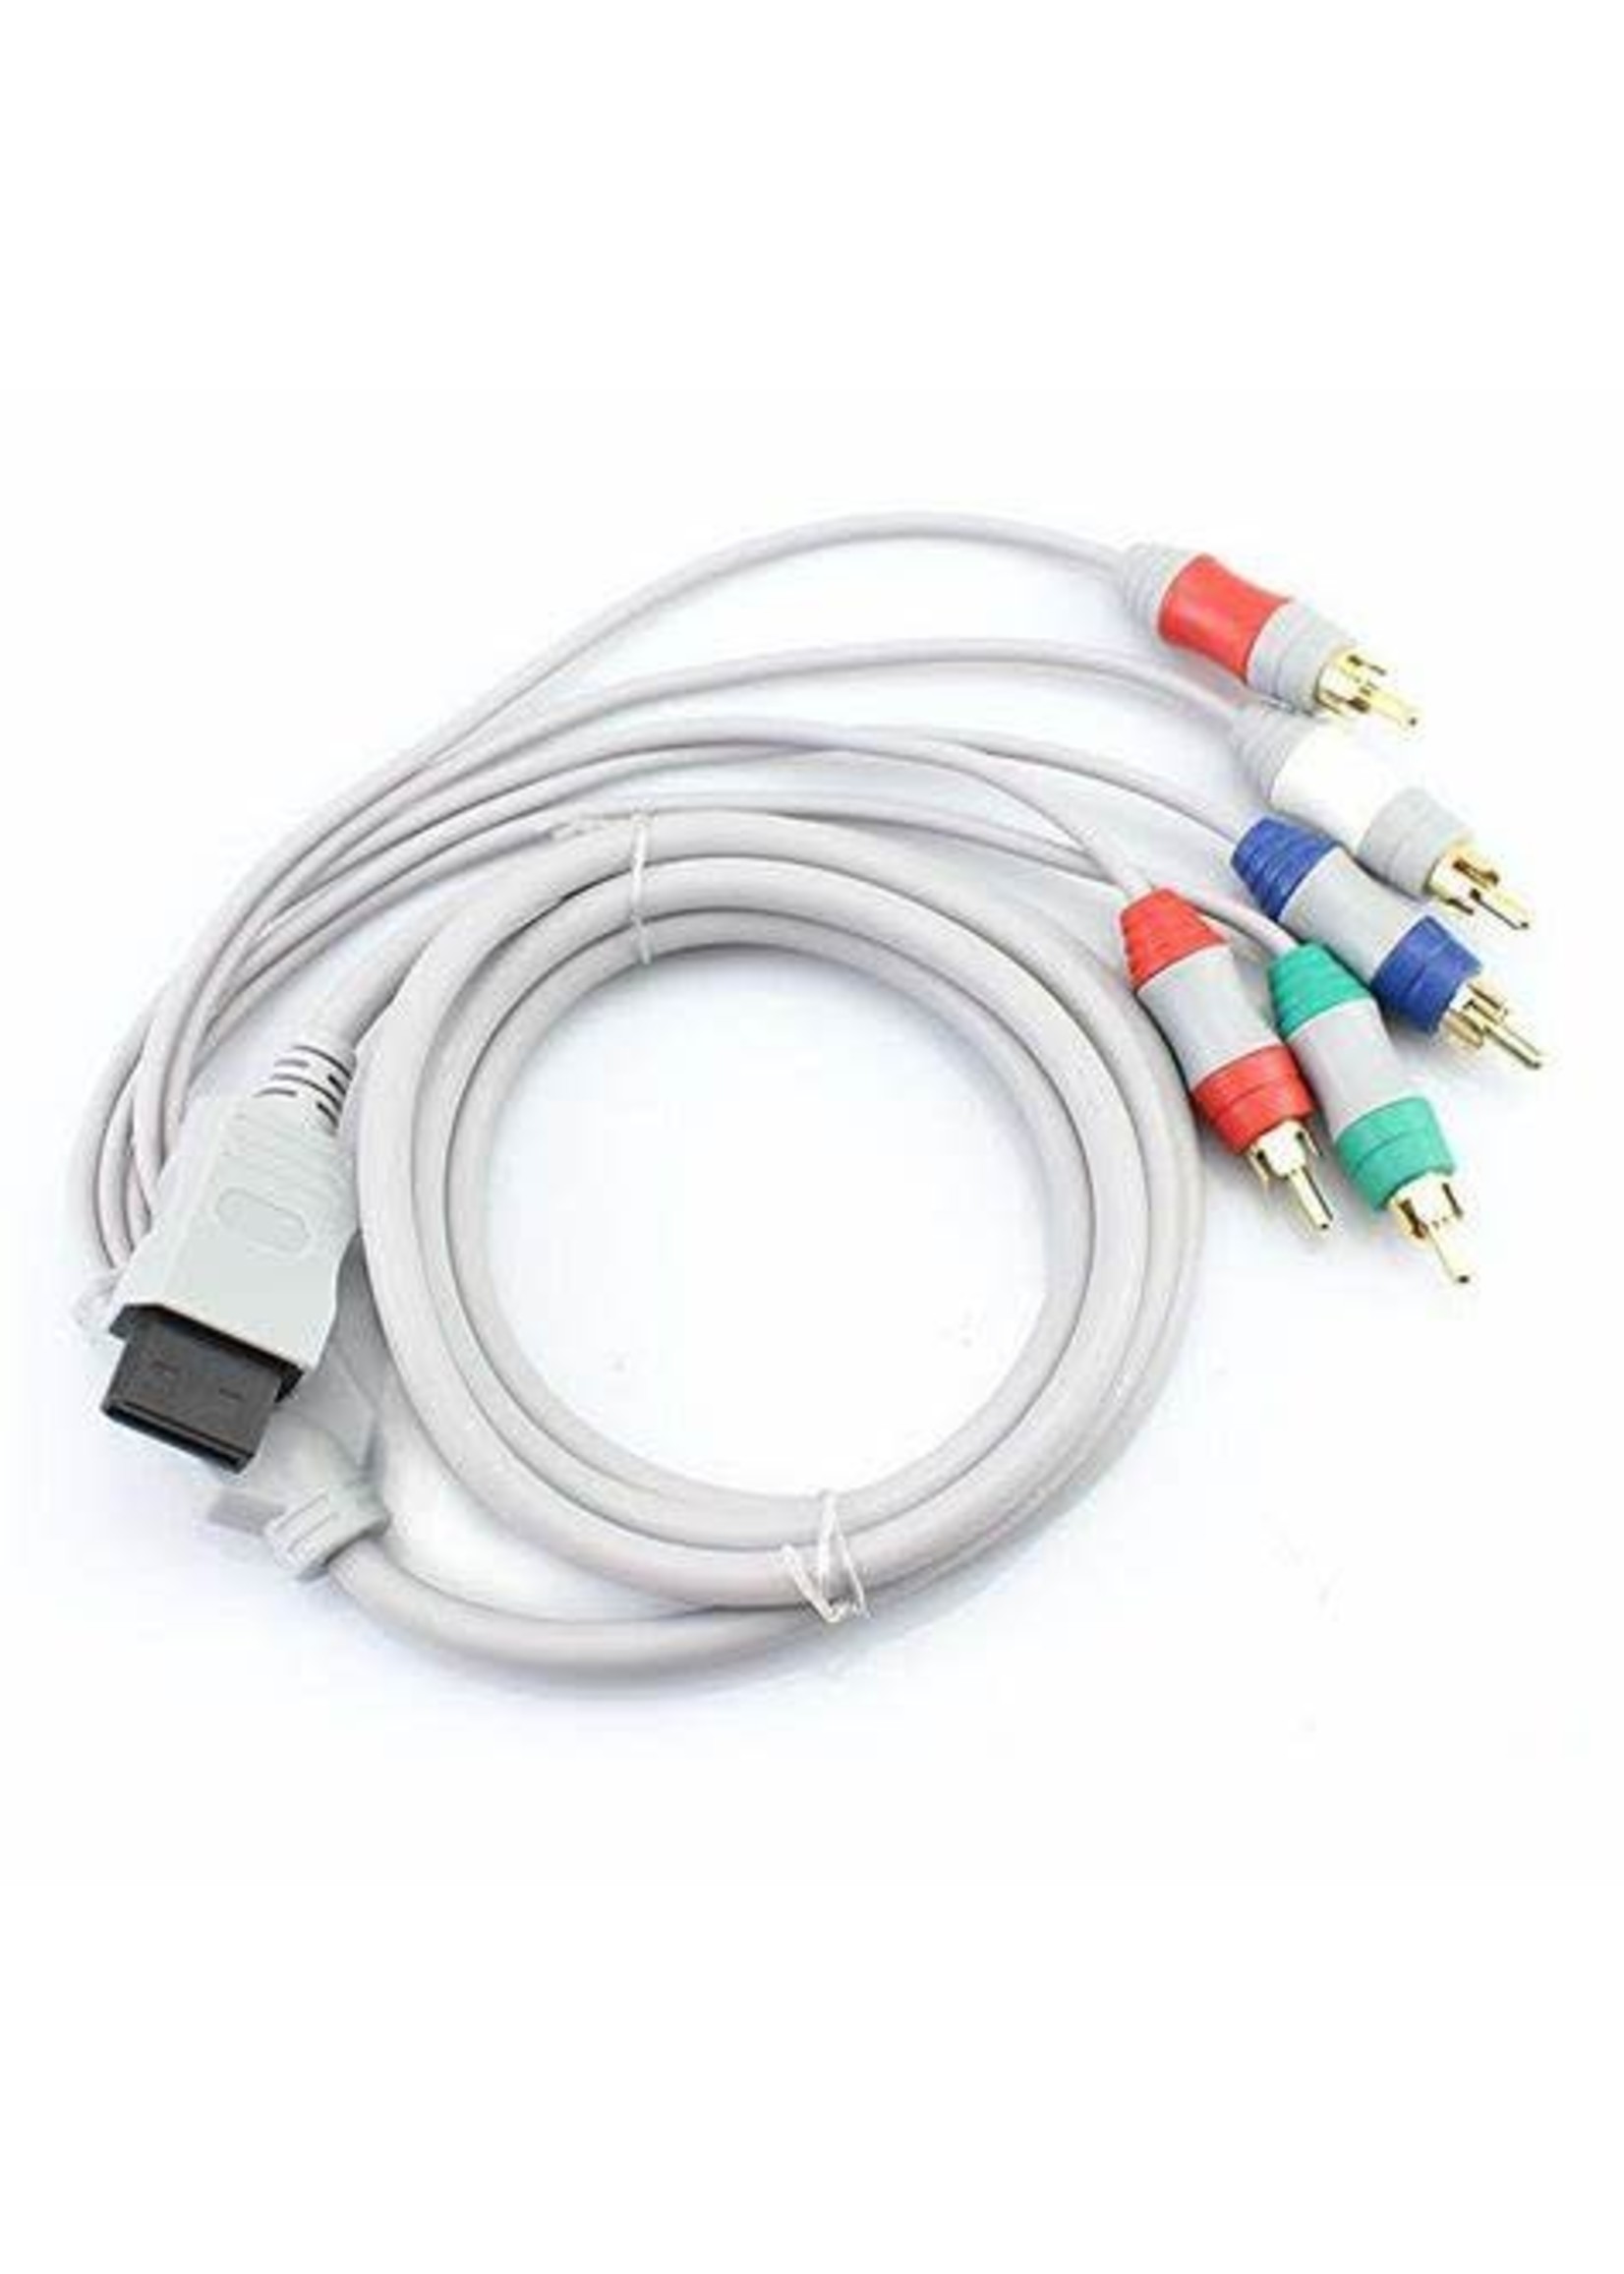 wii adaptor cables